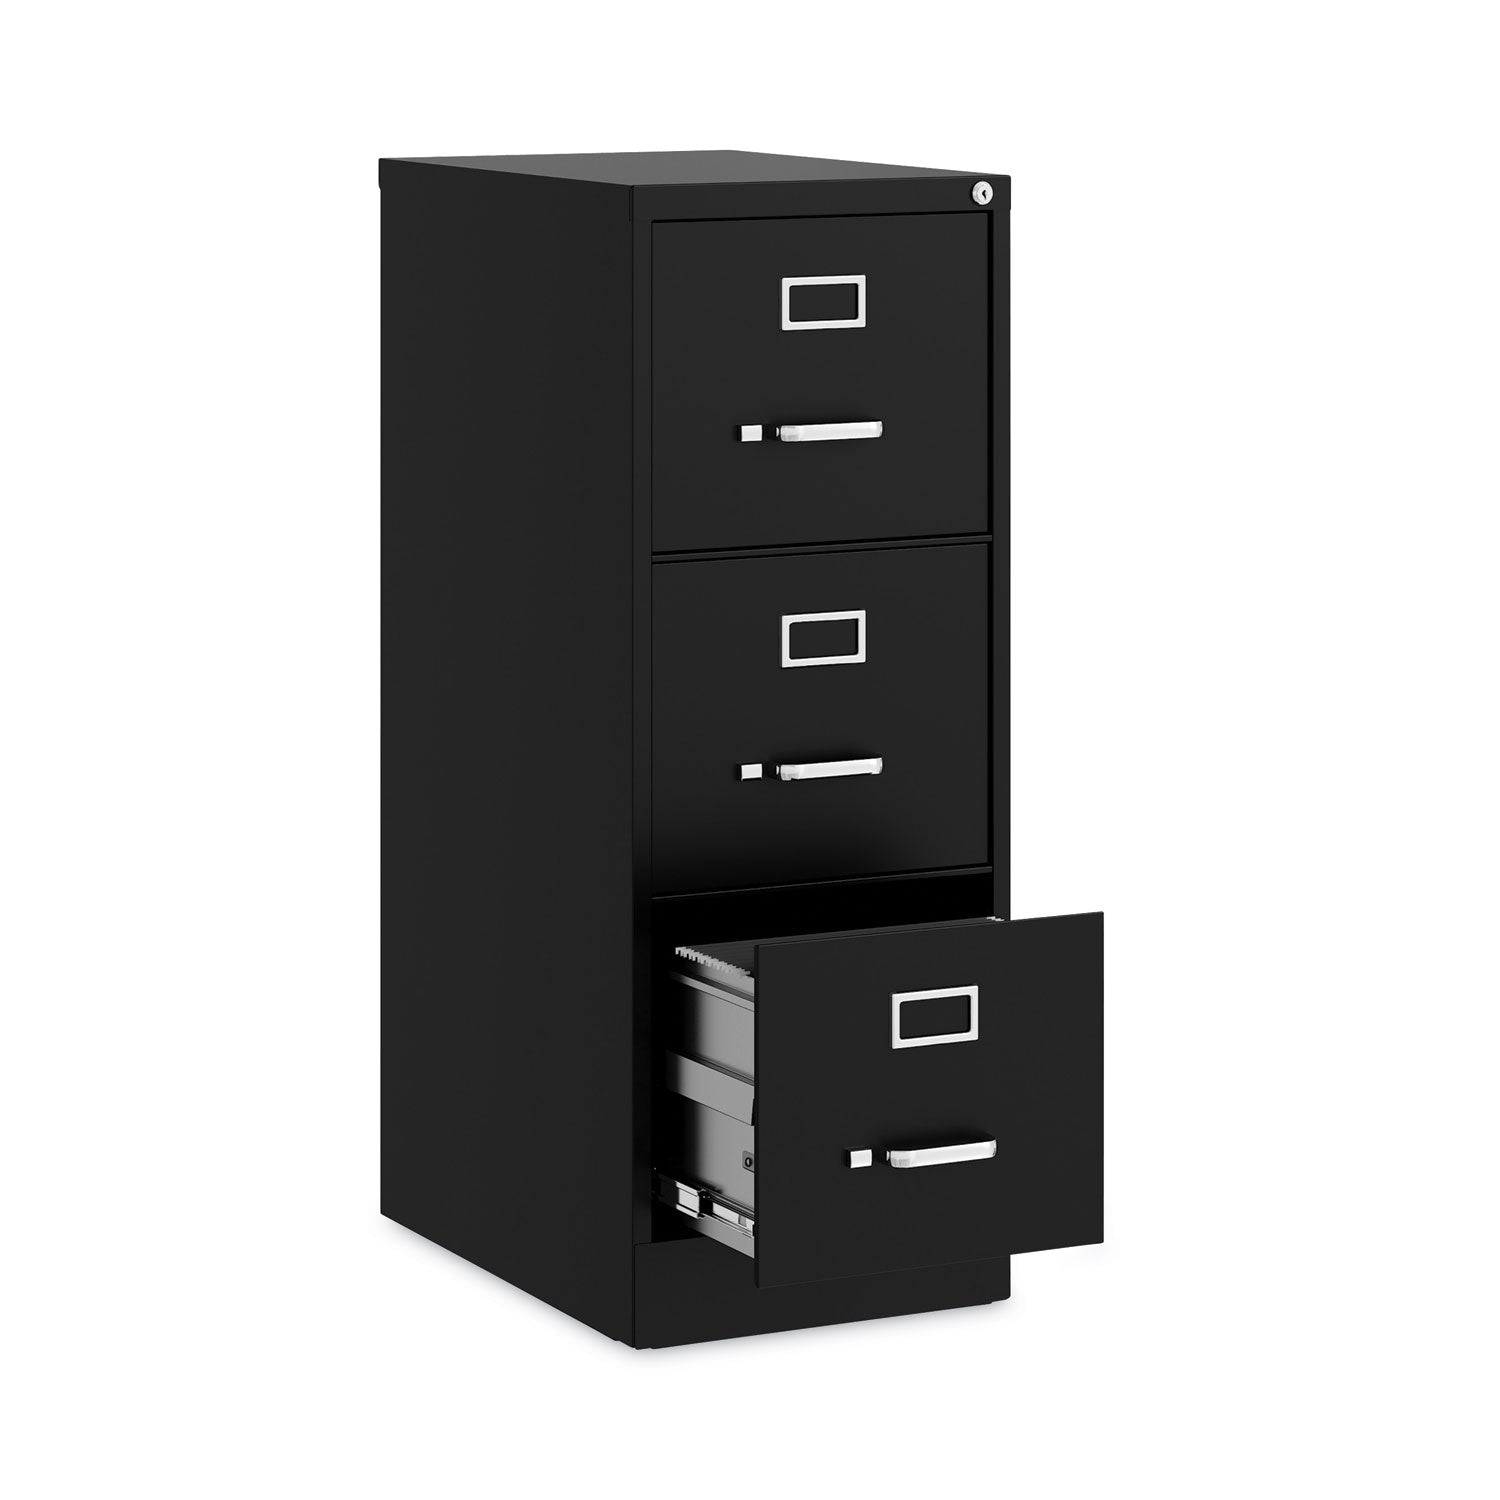 vertical-letter-file-cabinet-3-letter-size-file-drawers-black-15-x-22-x-4019_hid24856 - 2